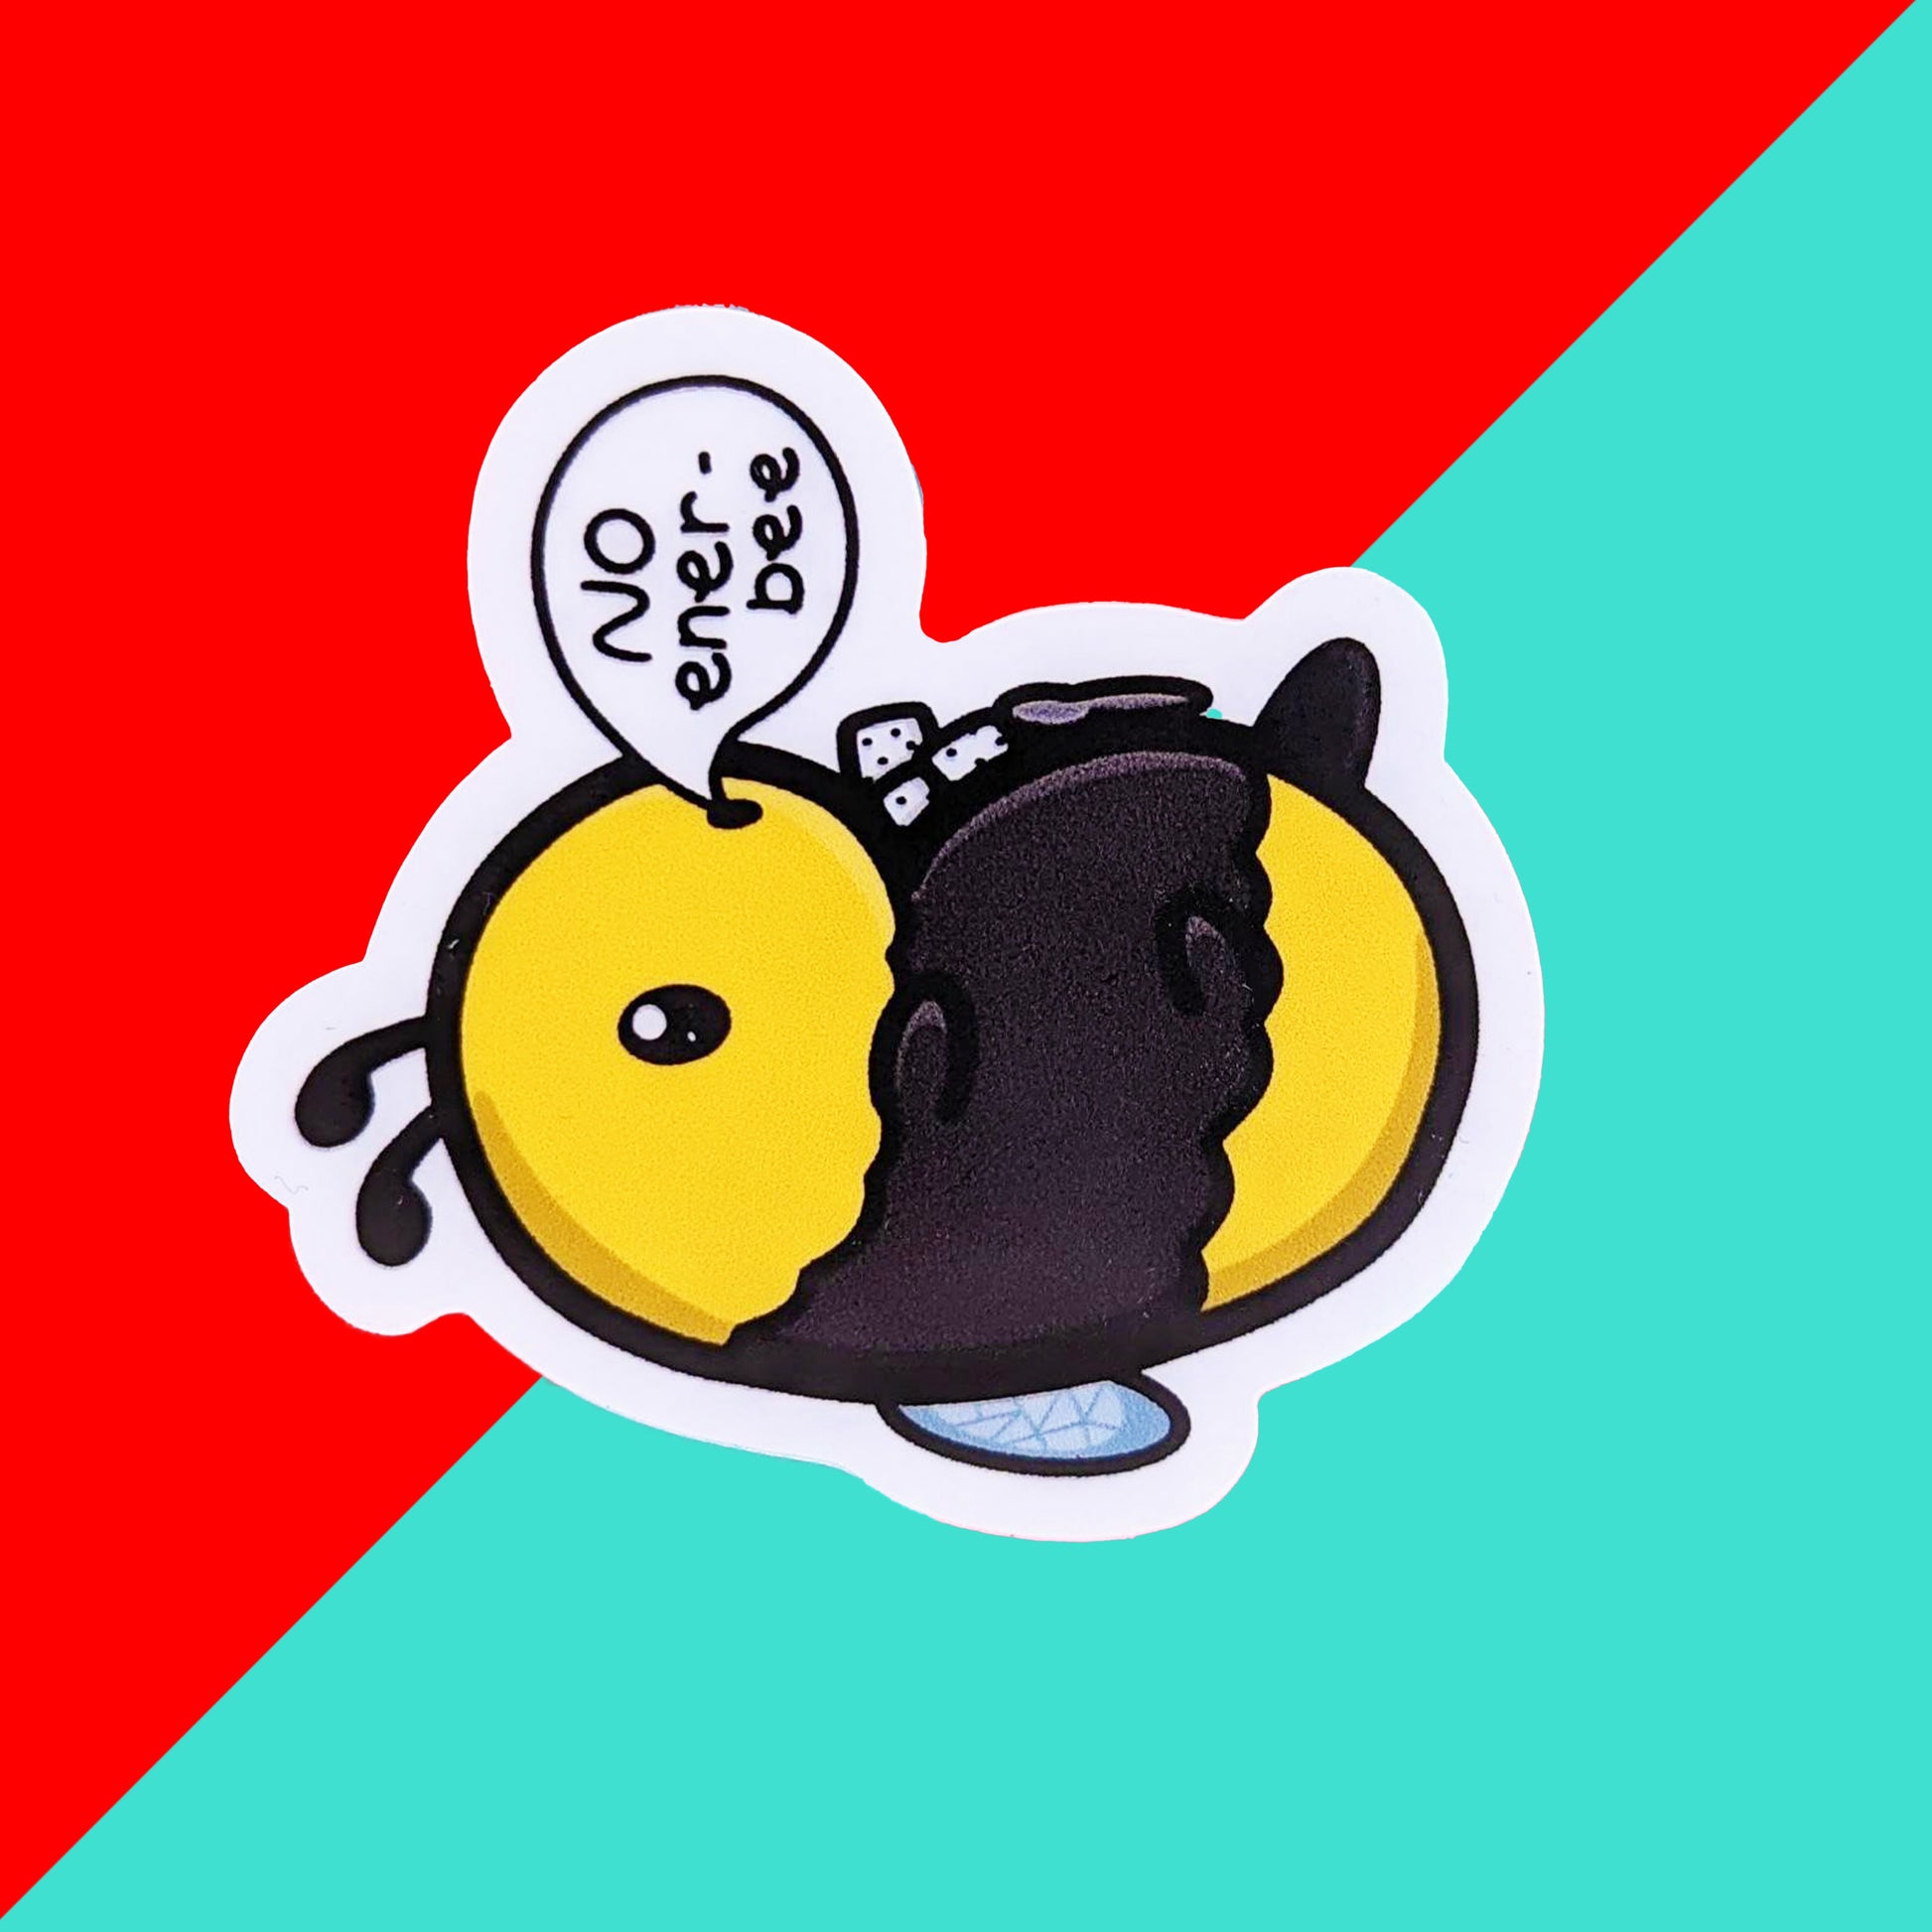 The Low Energy Bee Sticker on a red and blue background. The bumble bee shaped vinyl sticker is laying on its back with sugar cubes and a spoon on its belly with a speech bubble reading 'no ener-bee'. The hand drawn design is raising awareness for chronic fatigue.